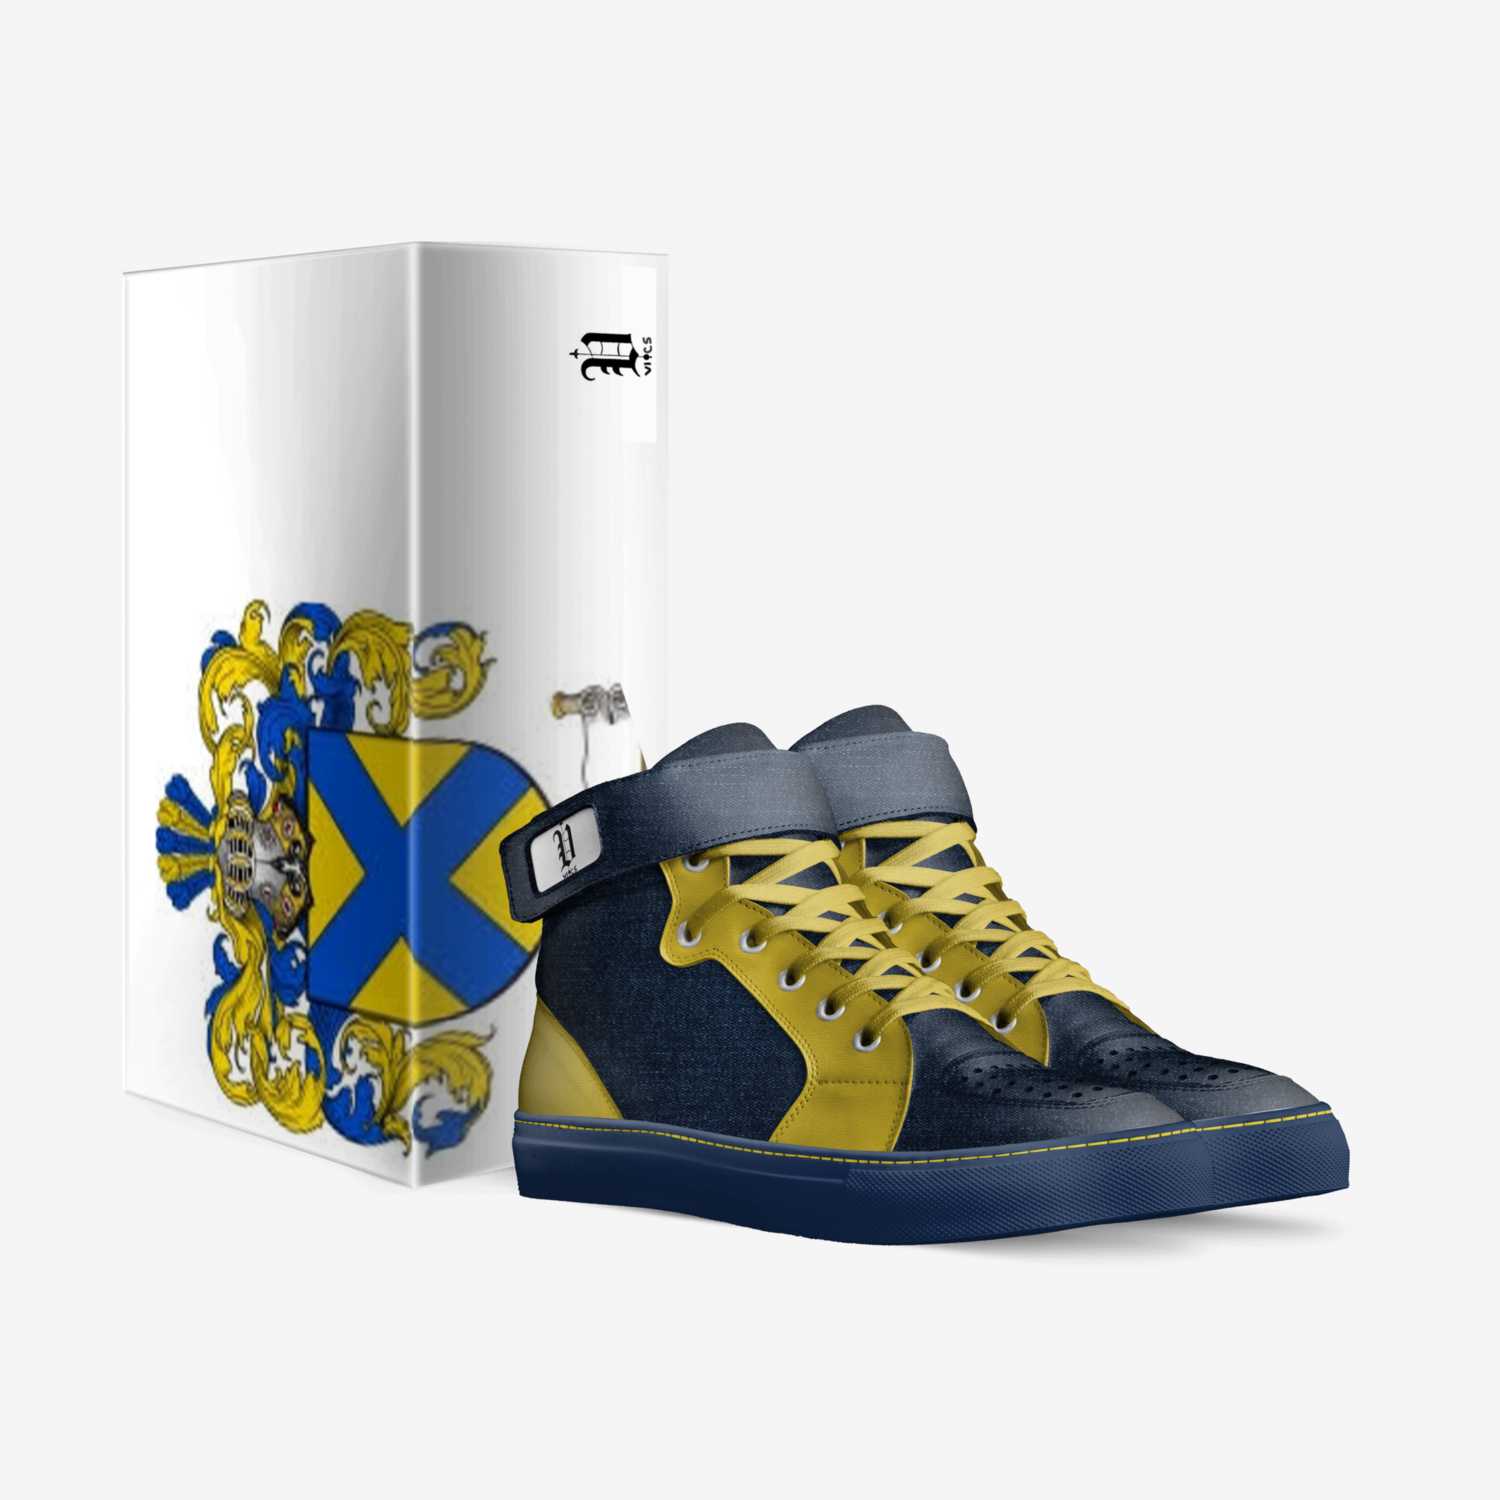 vics jeter 2 custom made in Italy shoes by Brayden Murphy | Box view